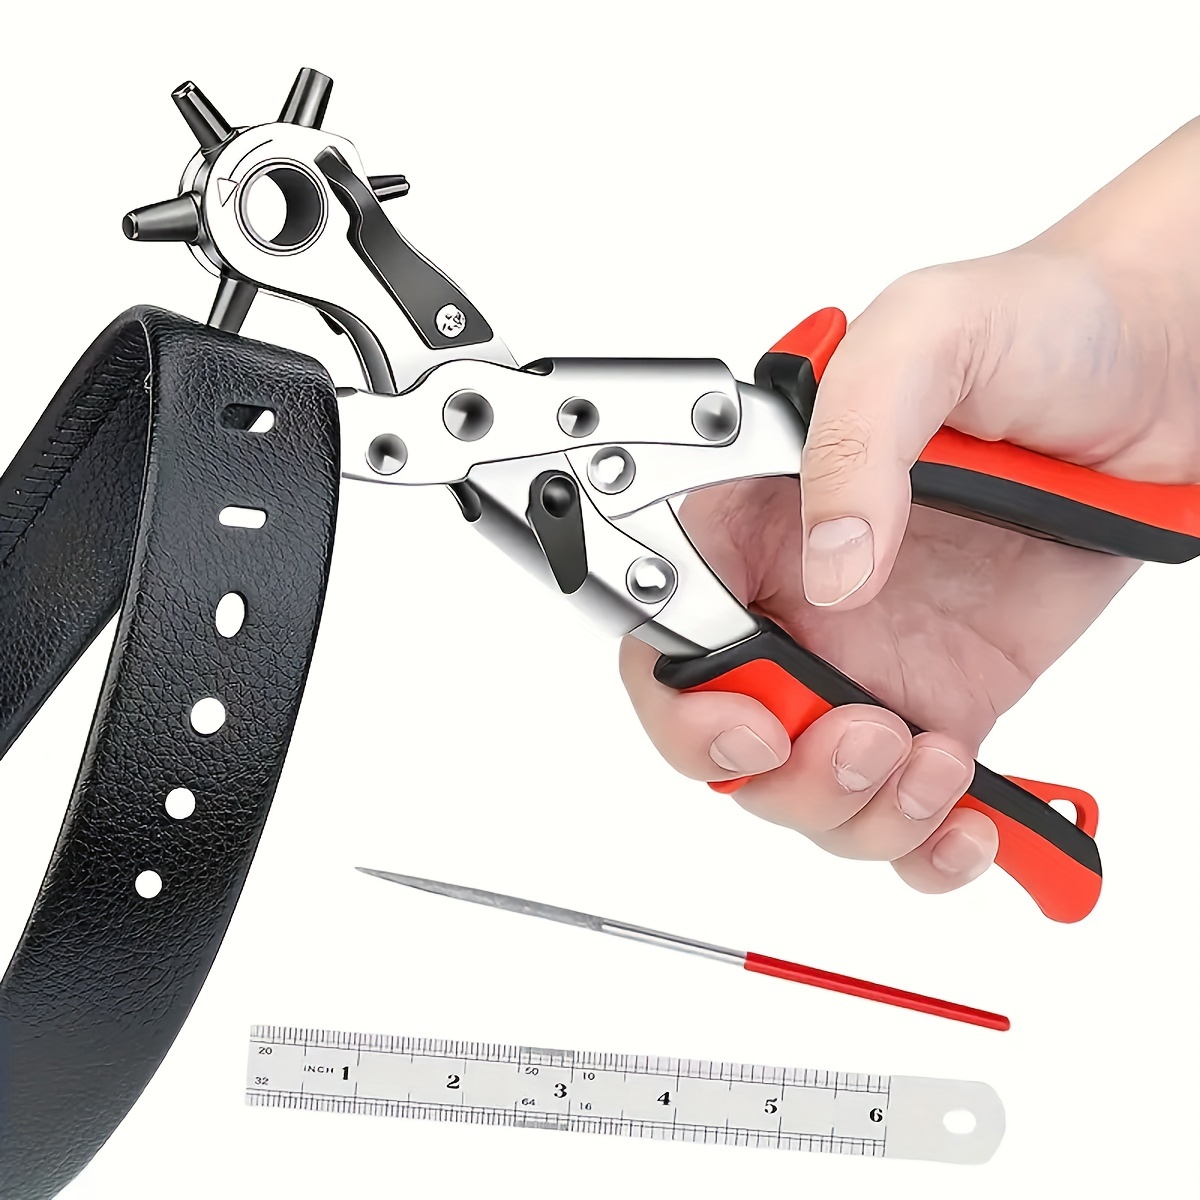 

1pc Multi-functional Leather Belt Hole Puncher - Durable Adjustable Manual Punch Pliers With Round, Flat, Oval Punching For Belts, Leather, Paper - Plastic & Steel Craft Tool